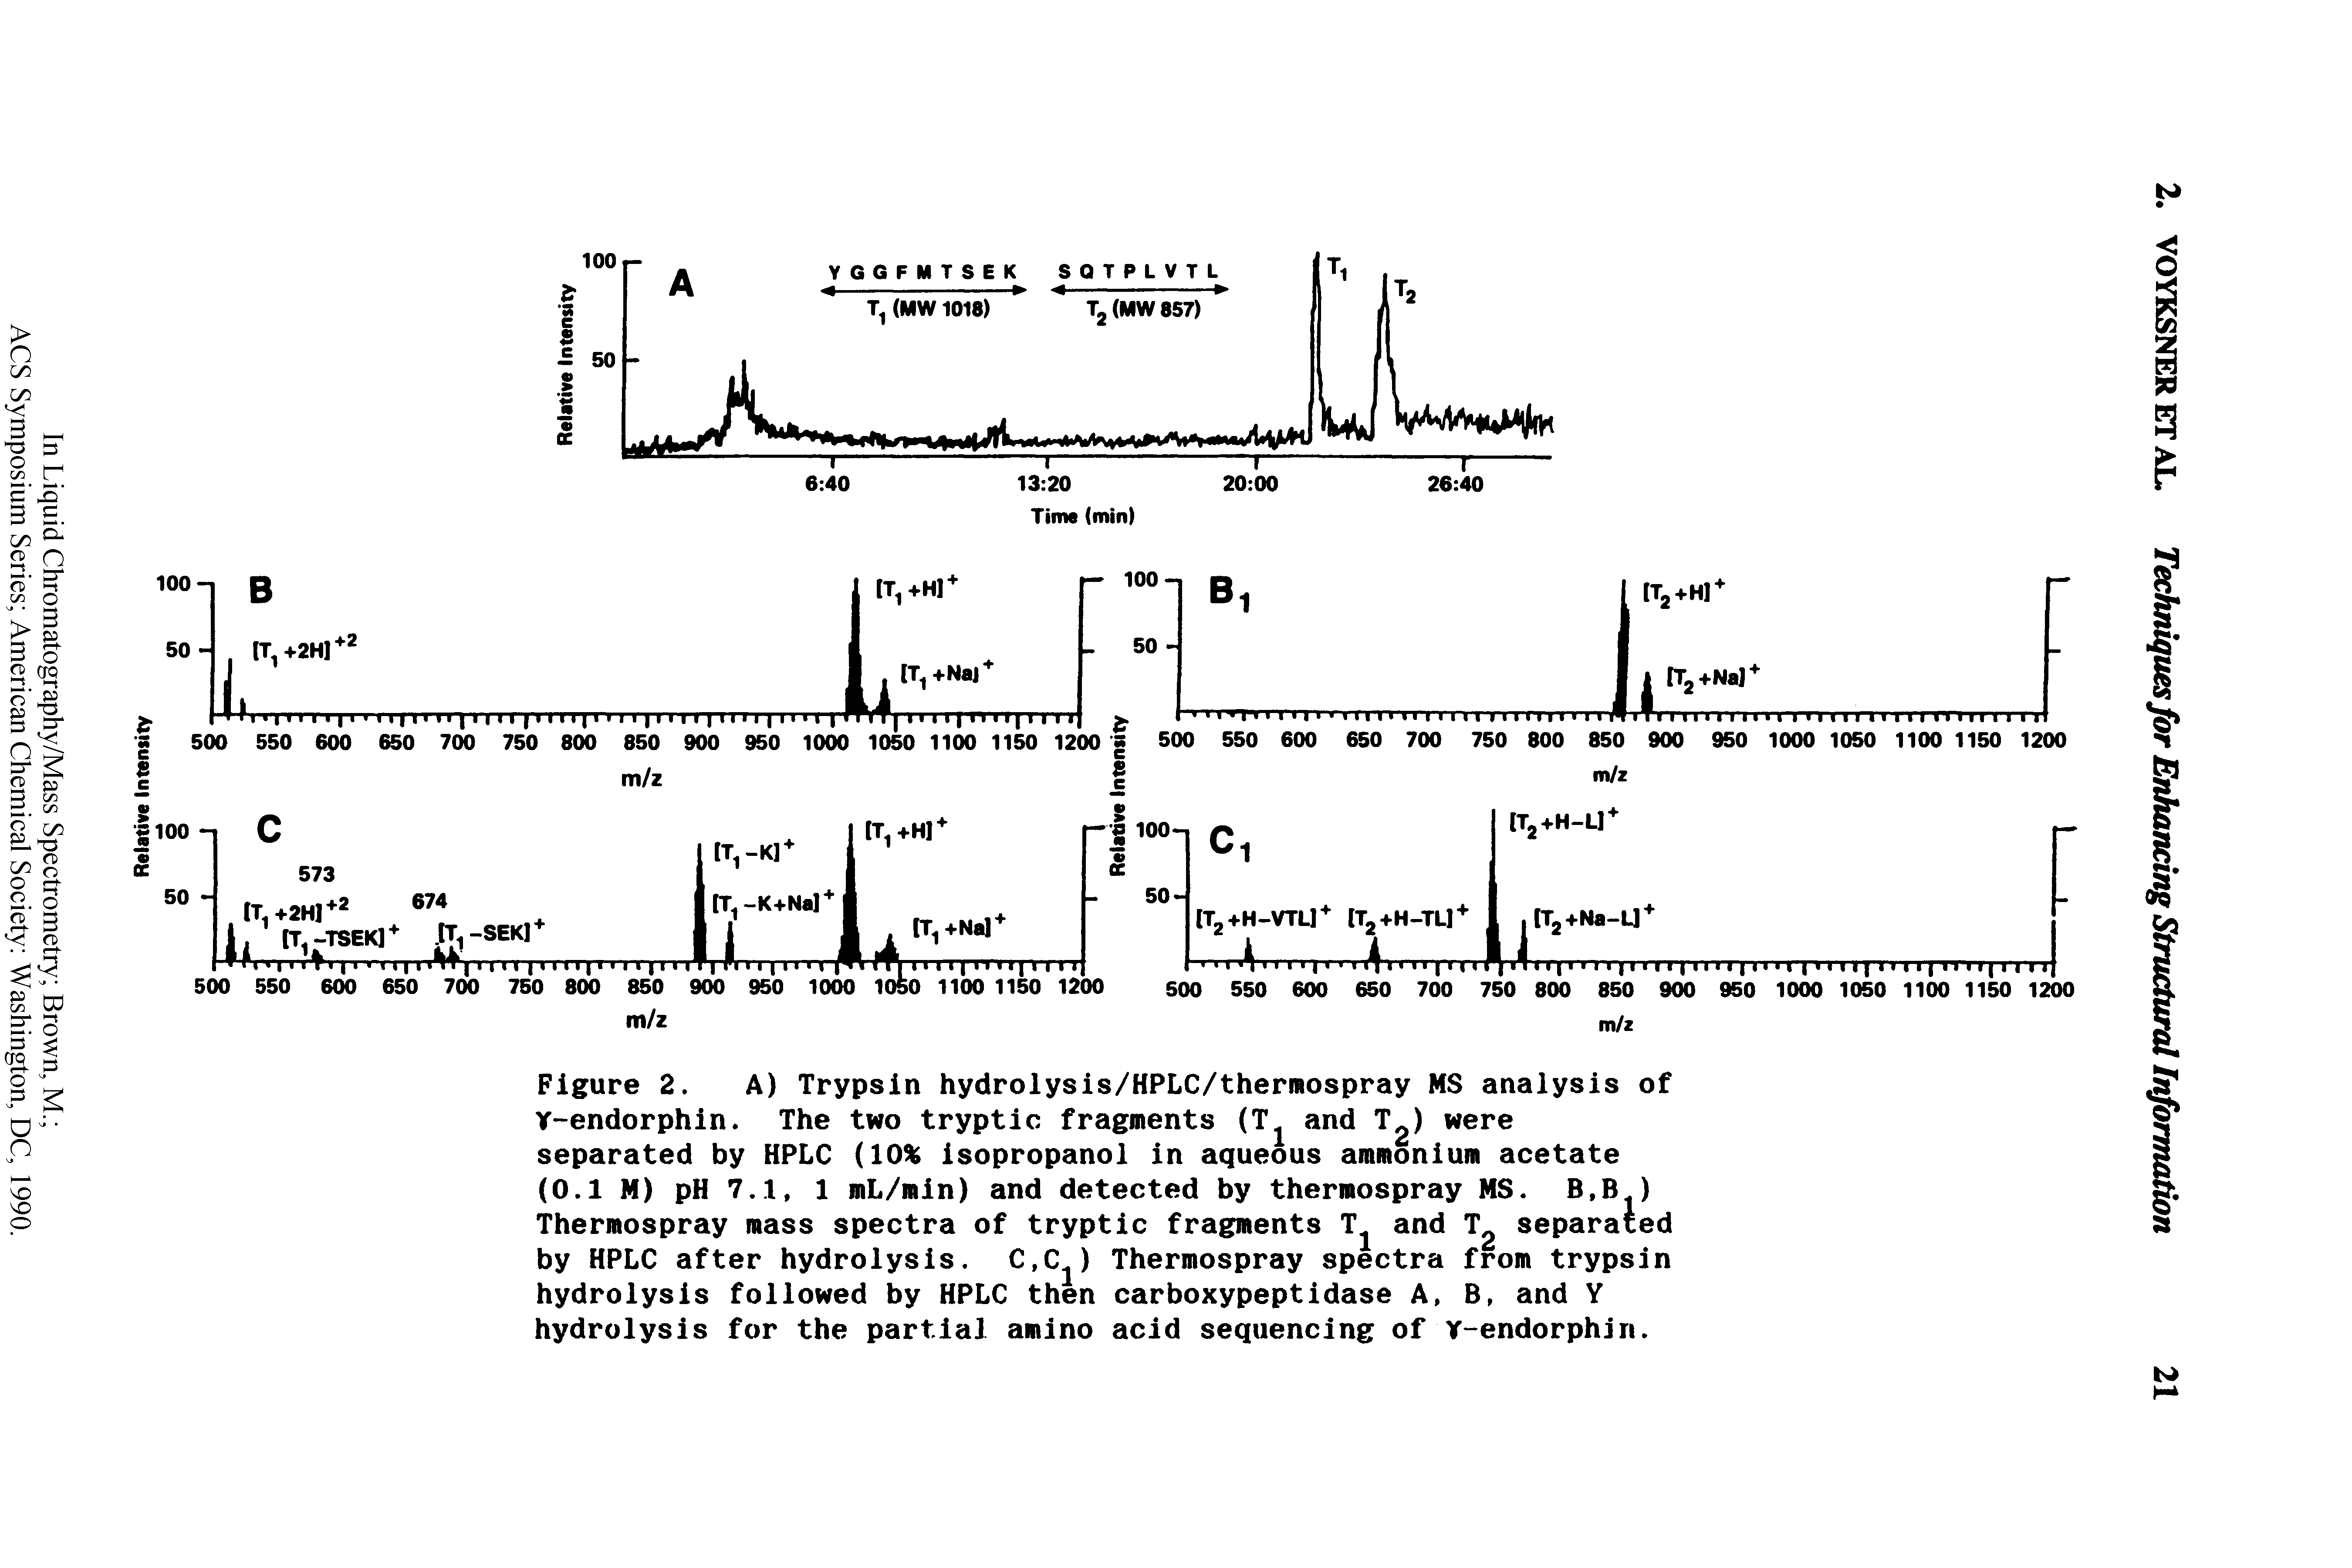 Figure 2. A) Trypsin hydrolysis/HPLC/thermospray MS analysis of Y-endorphin. The two tryptic fragments (T1 and T ) were separated by HPLC (10% isopropanol in aqueous ammonium acetate (0.1 M) pH 7.1, 1 mL/min) and detected by thermospray MS. B,B ) Thermospray mass spectra of tryptic fragments and Tg separated by HPLC after hydrolysis. C,Cj) Thermospray spectra from trypsin hydrolysis followed by HPLC then carboxypeptidase A, B, and Y hydrolysis for the partial amino acid sequencing of Y-endorphin.